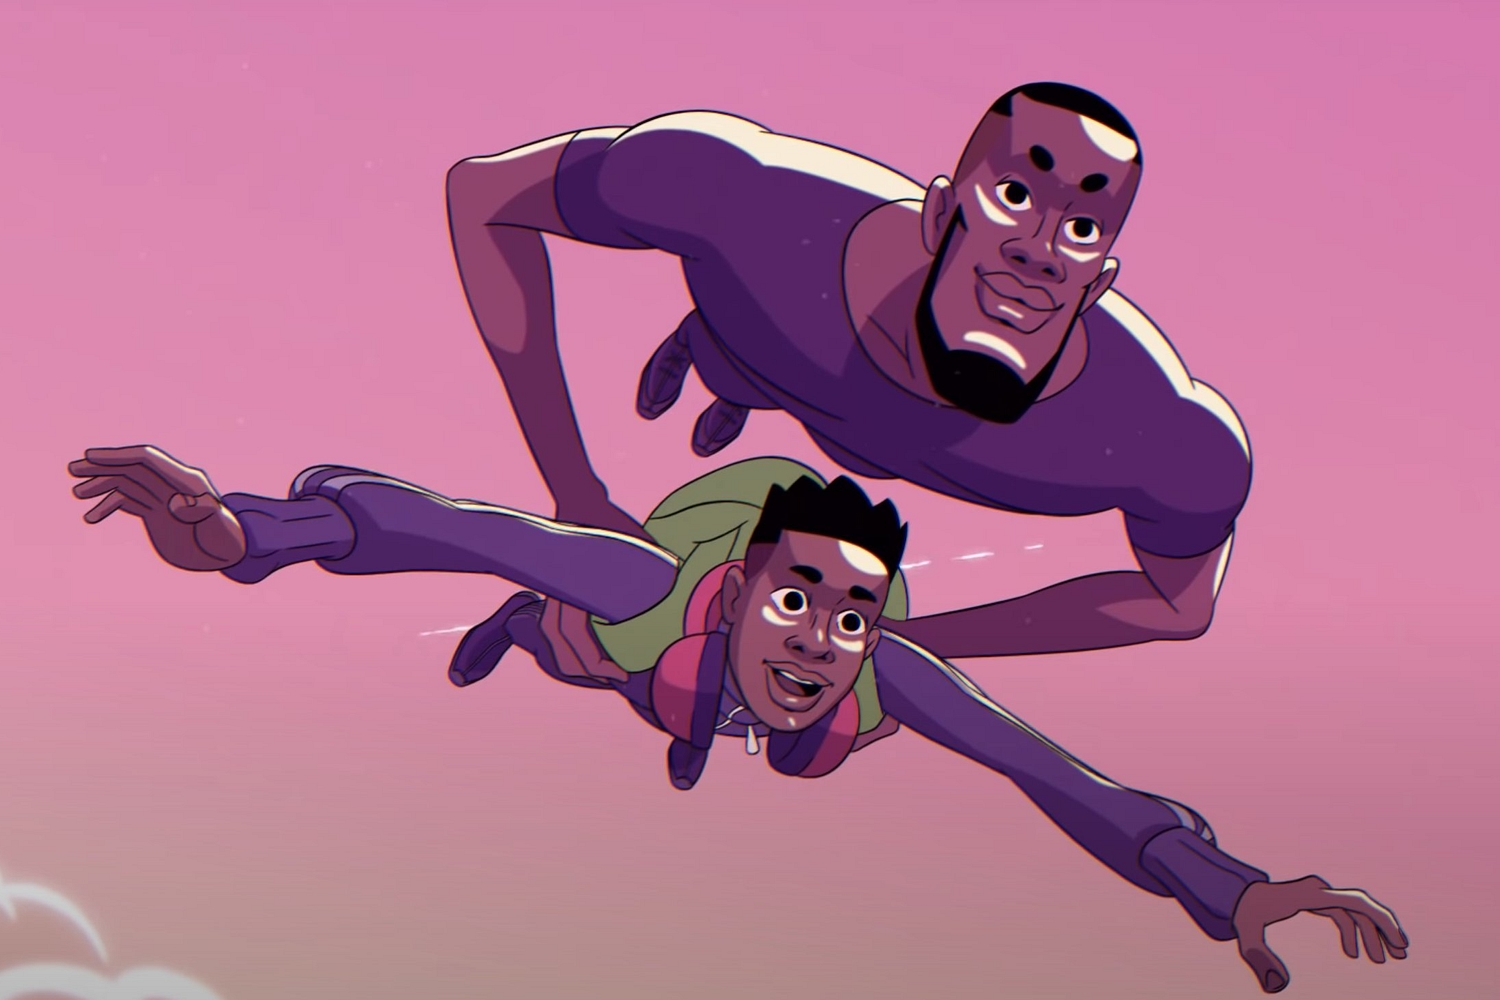 Stormzy shares animated 'Superheroes' video